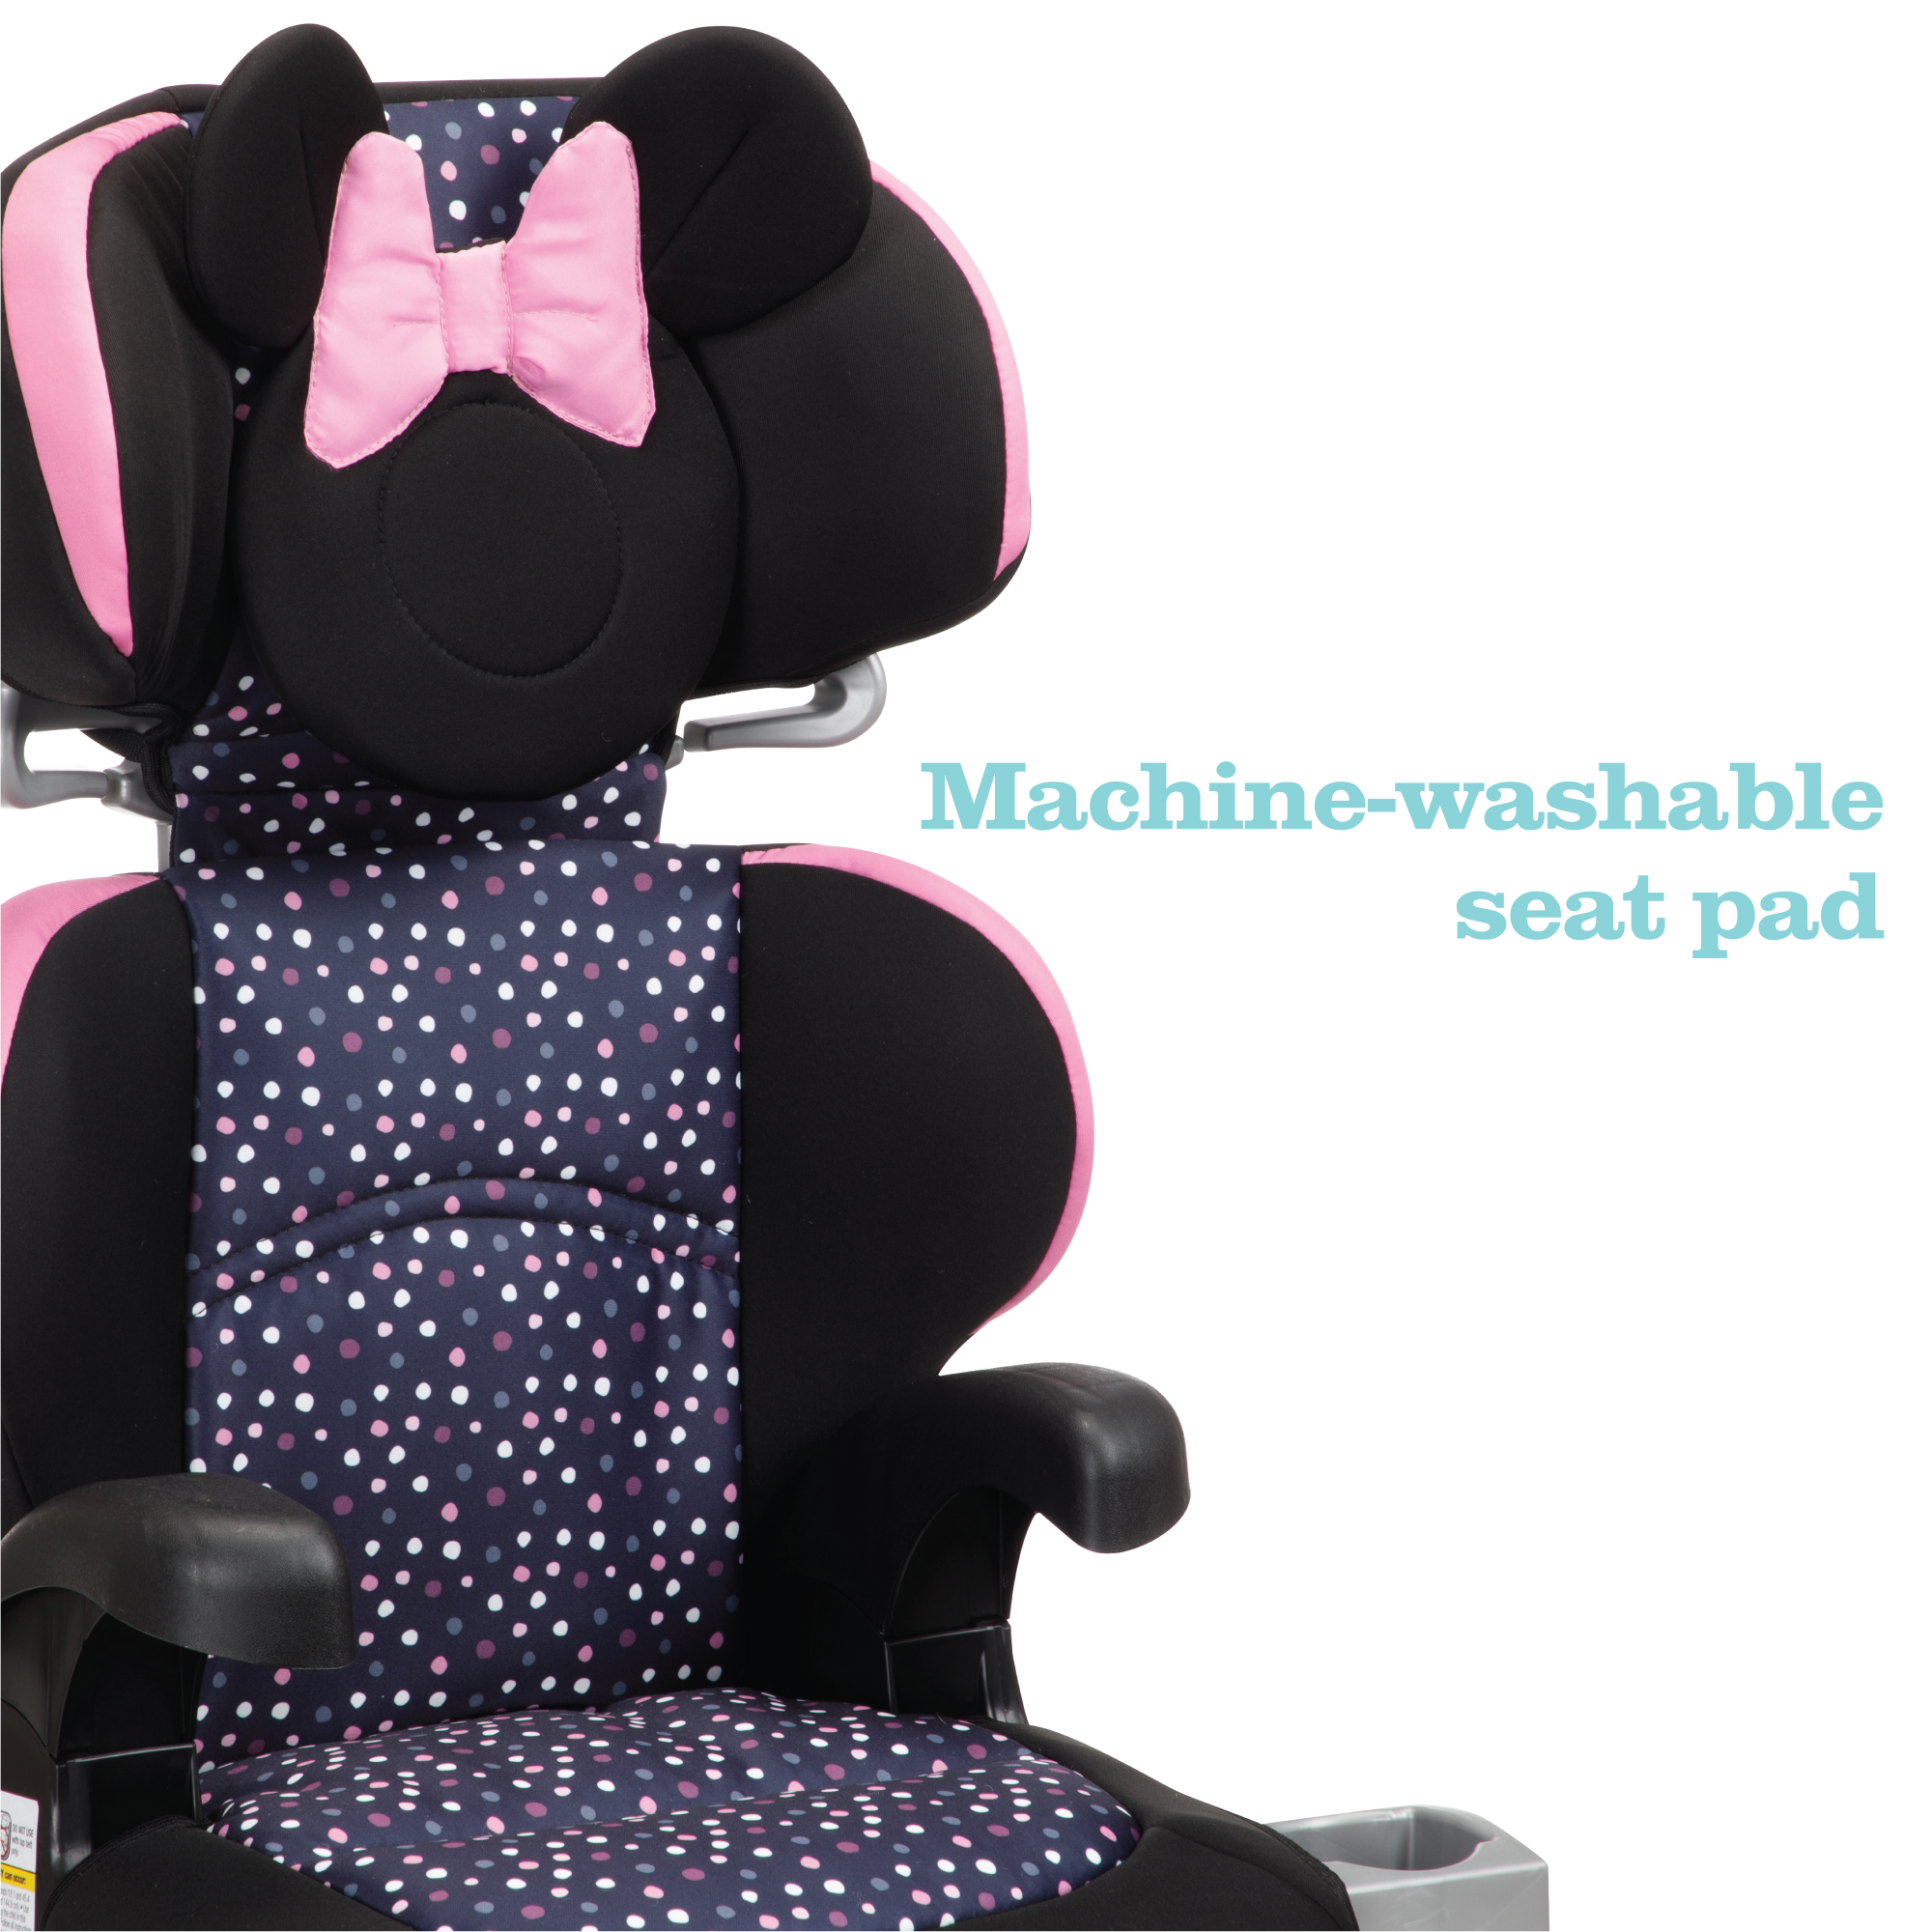 Disney Baby Pronto!™ Belt-Positioning Booster Car Seat - Minnie Dot Party - 2-in-1: belt-positioning booster easily converts to a backless booster